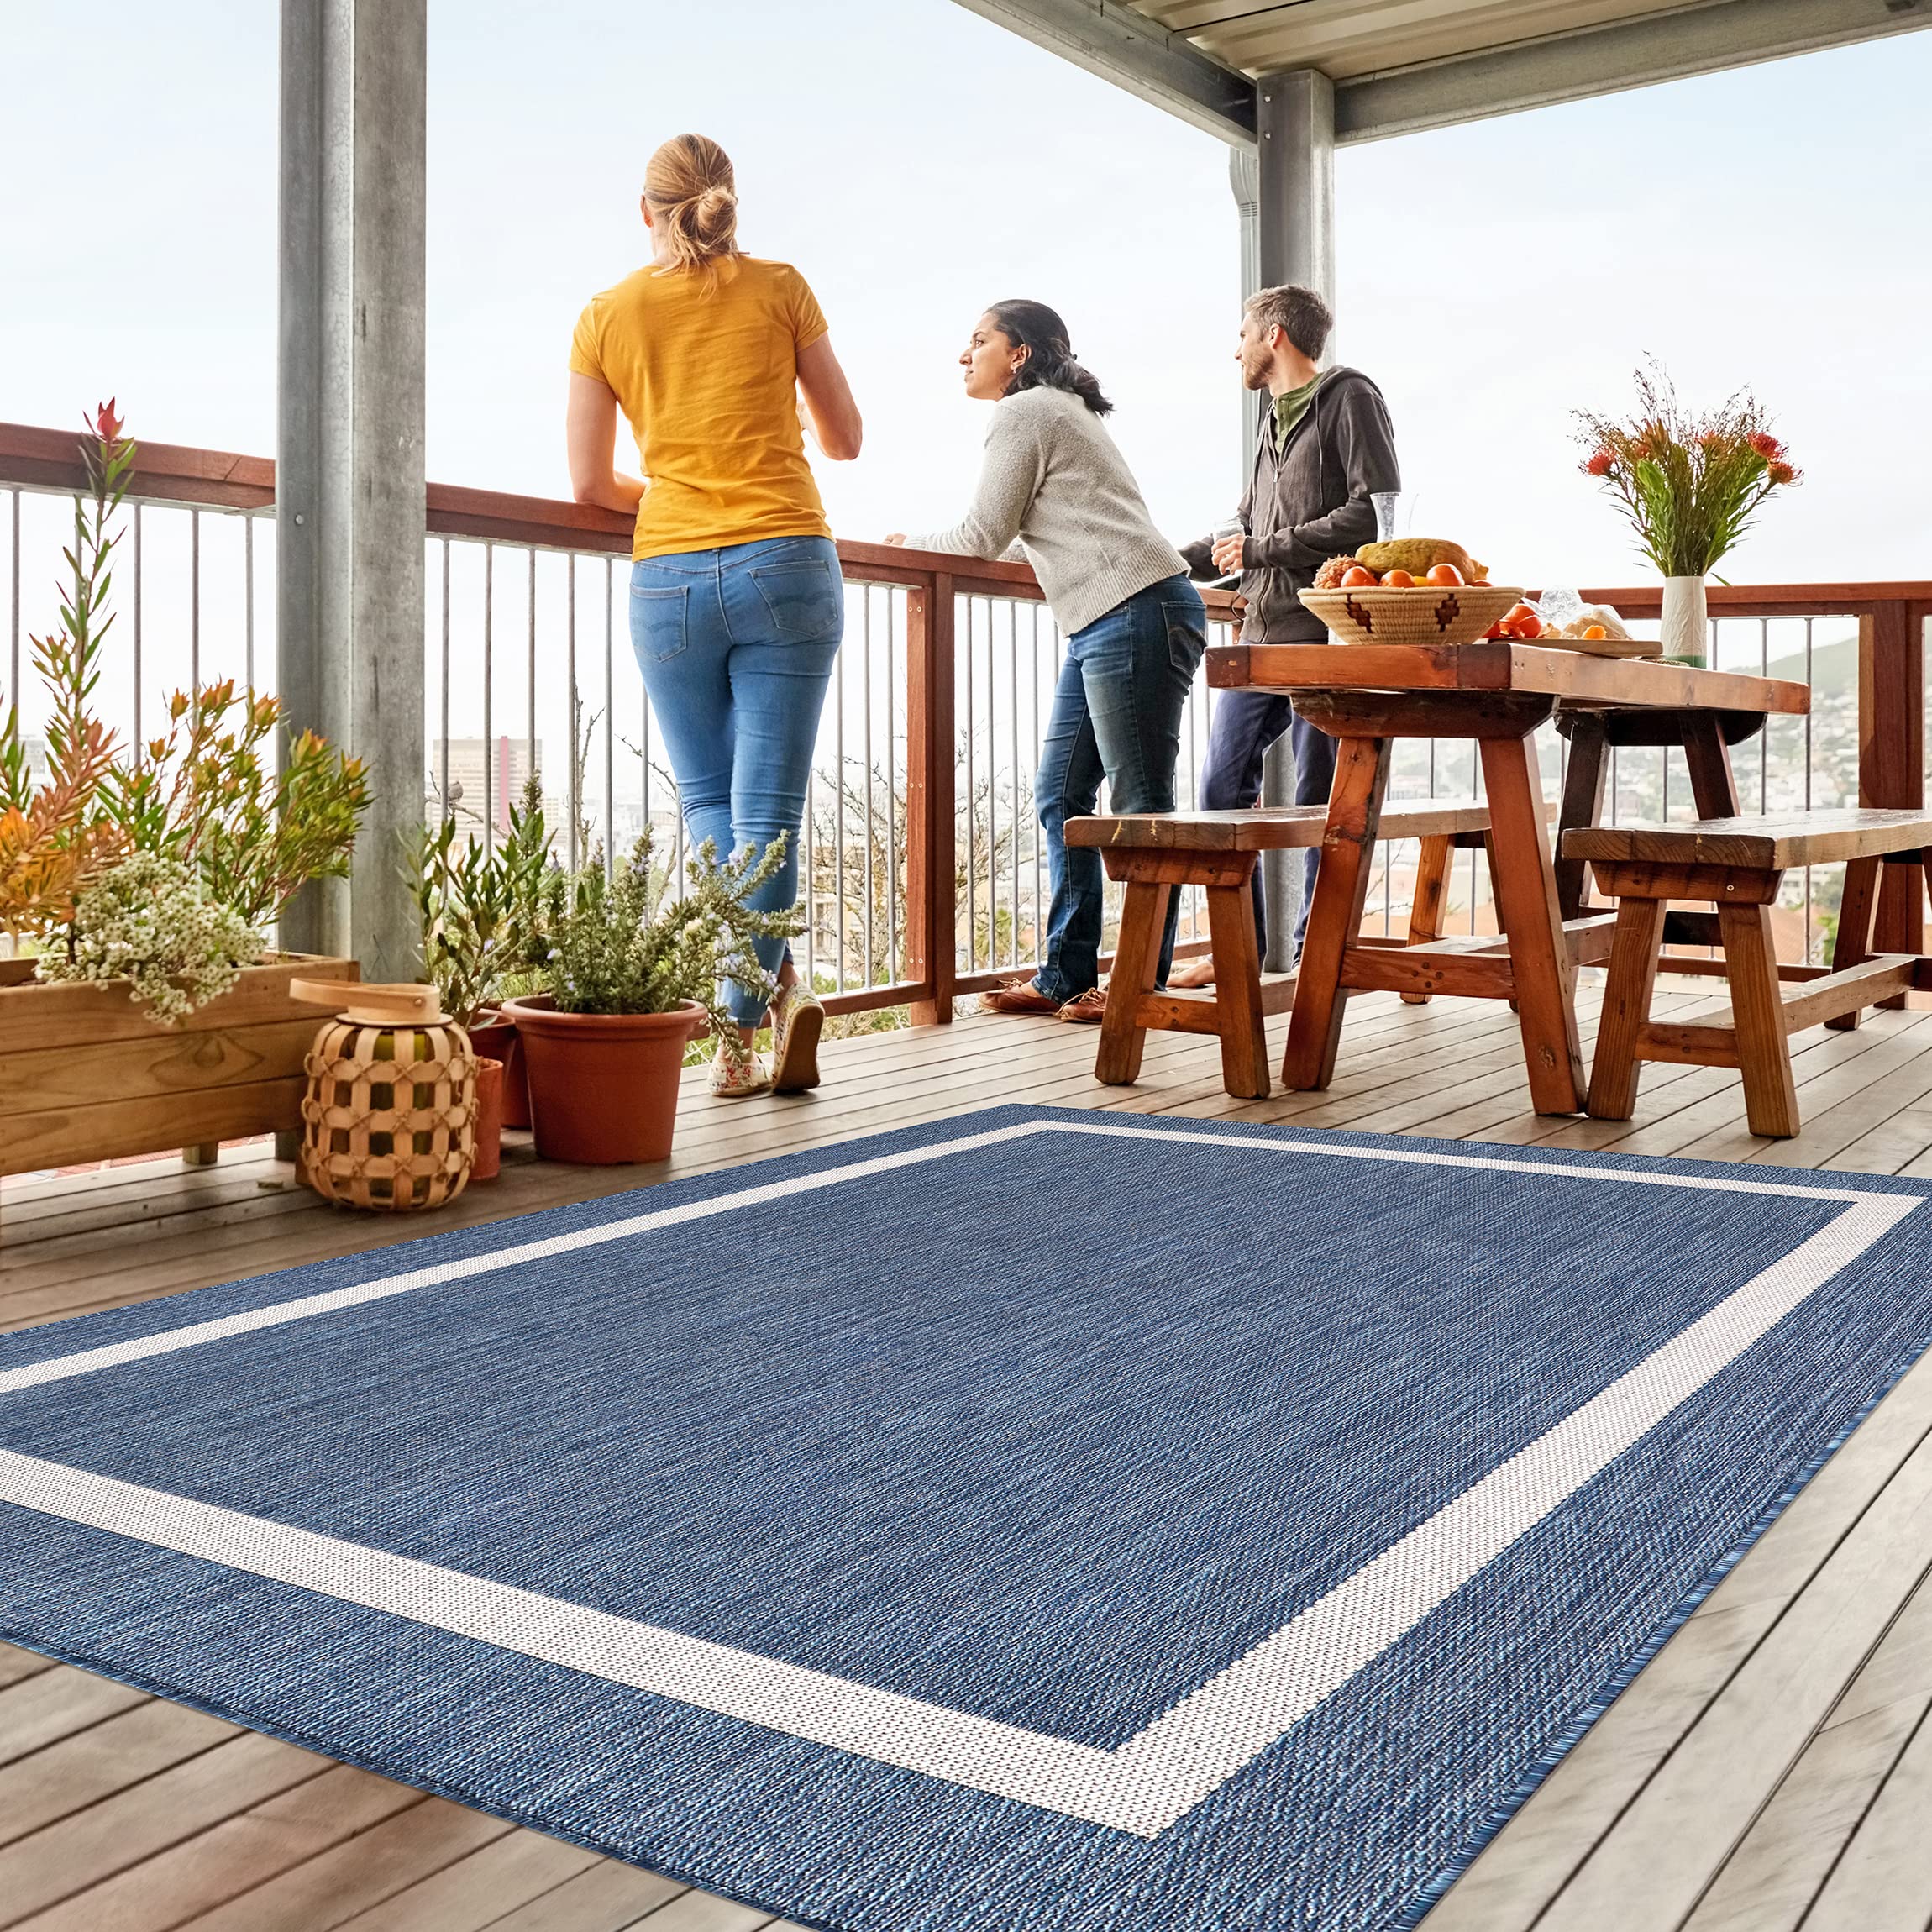 Beverly Rug Waikiki Indoor Outdoor Rug 8x10, Washable Outside Carpet for Patio, Deck, Porch, Bordered Modern Area Rug, Water Resistant, Blue - White